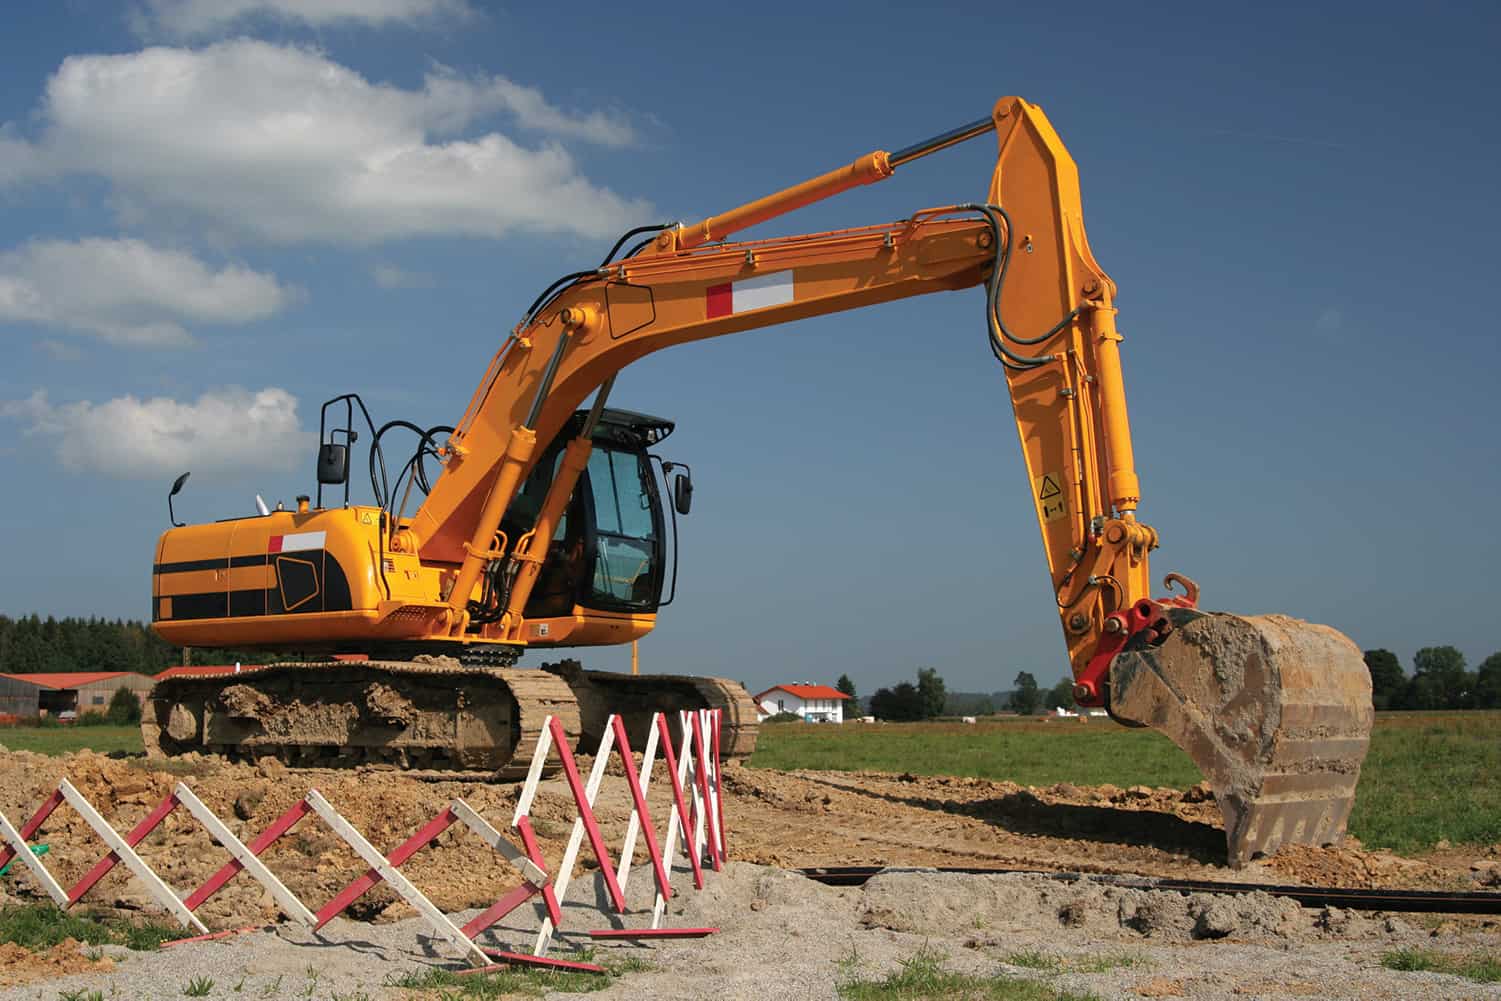 Mechanical Digger in field with safety fence around it